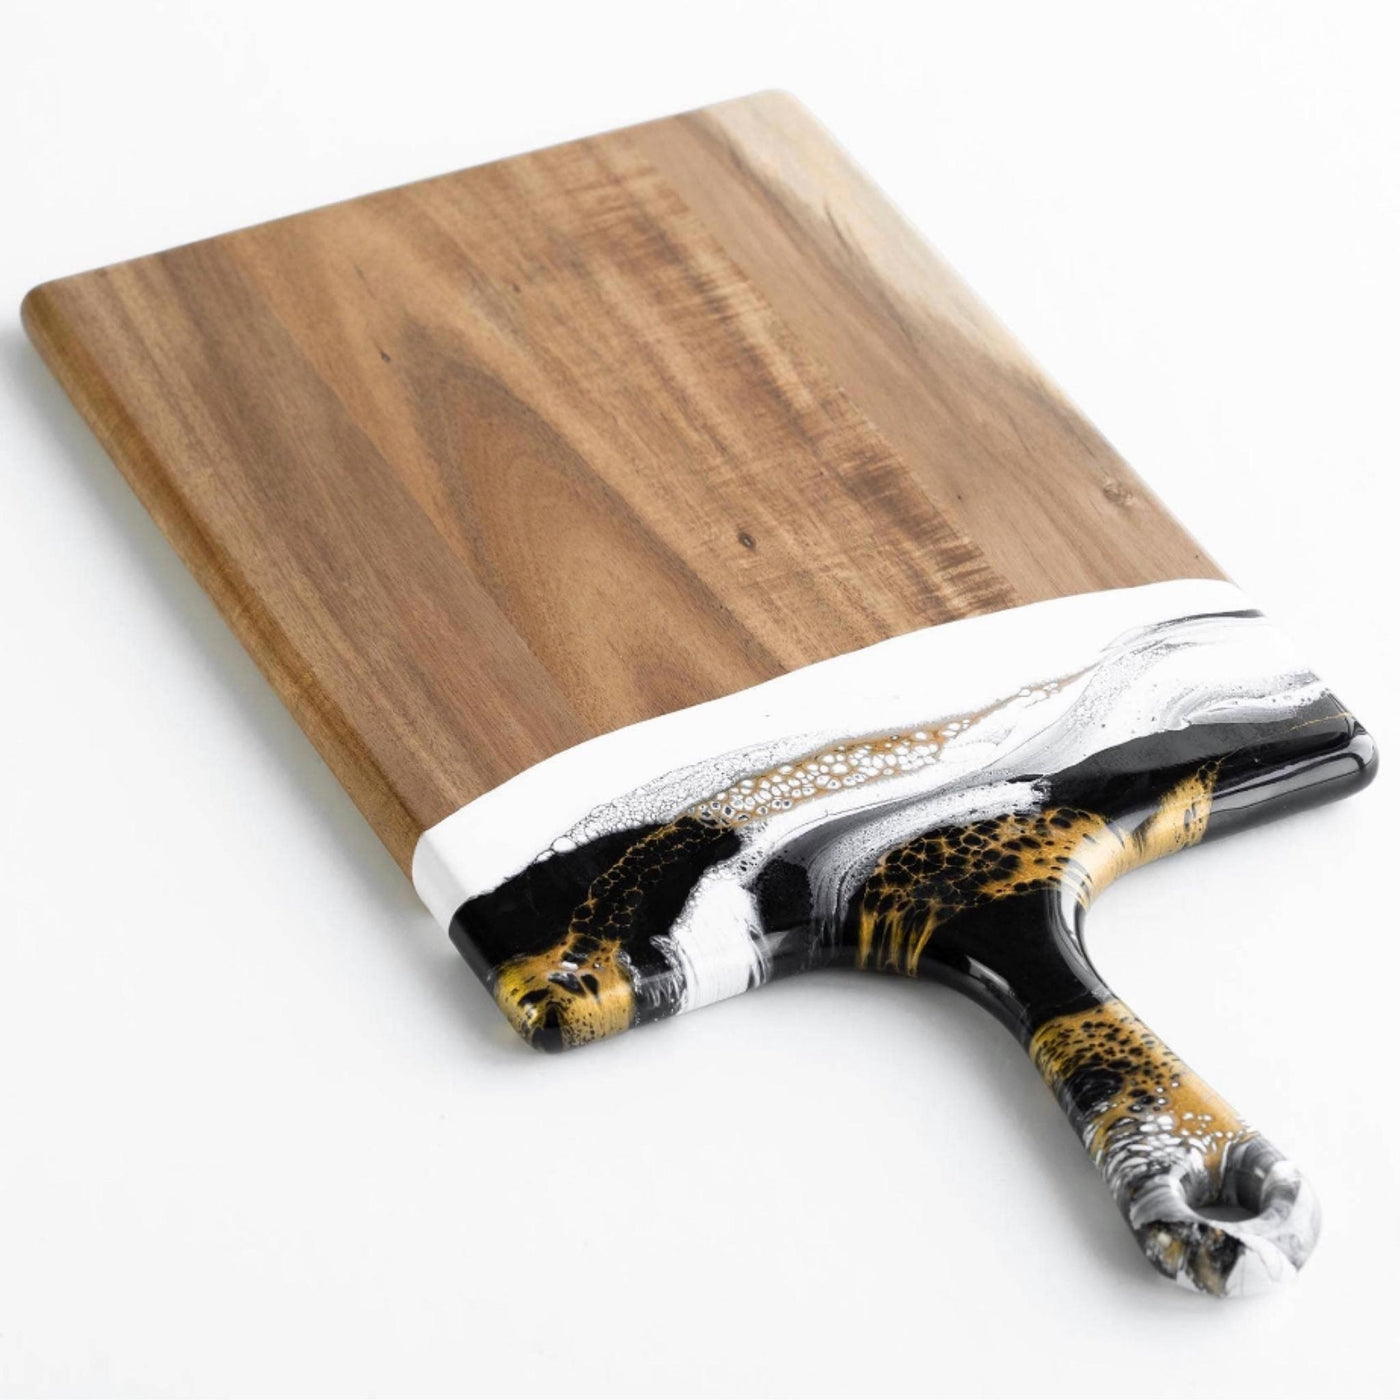 Acacia Resin Cheeseboards: Black/White/Gold - Large 10"x20" - Set With Style